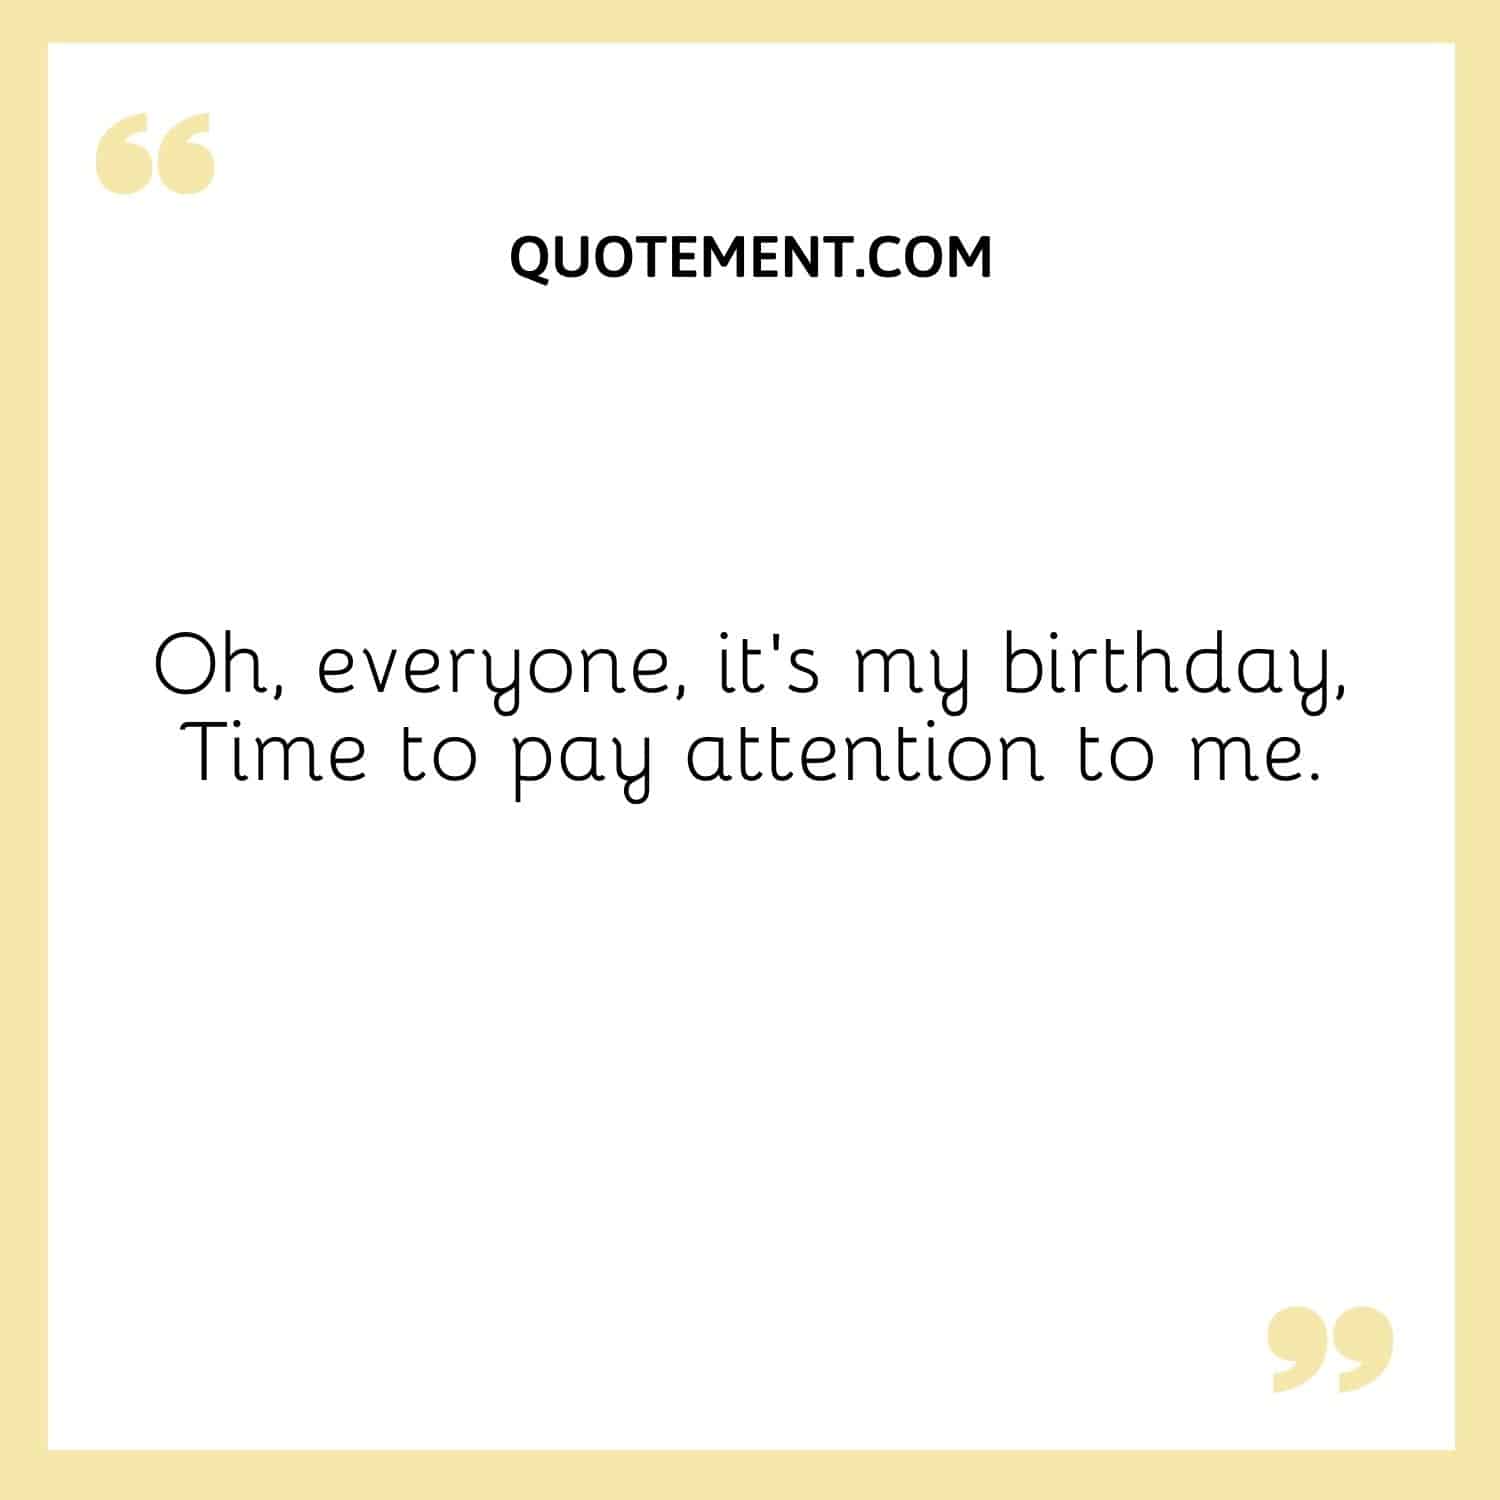 Oh, everyone, it’s my birthday, Time to pay attention to me